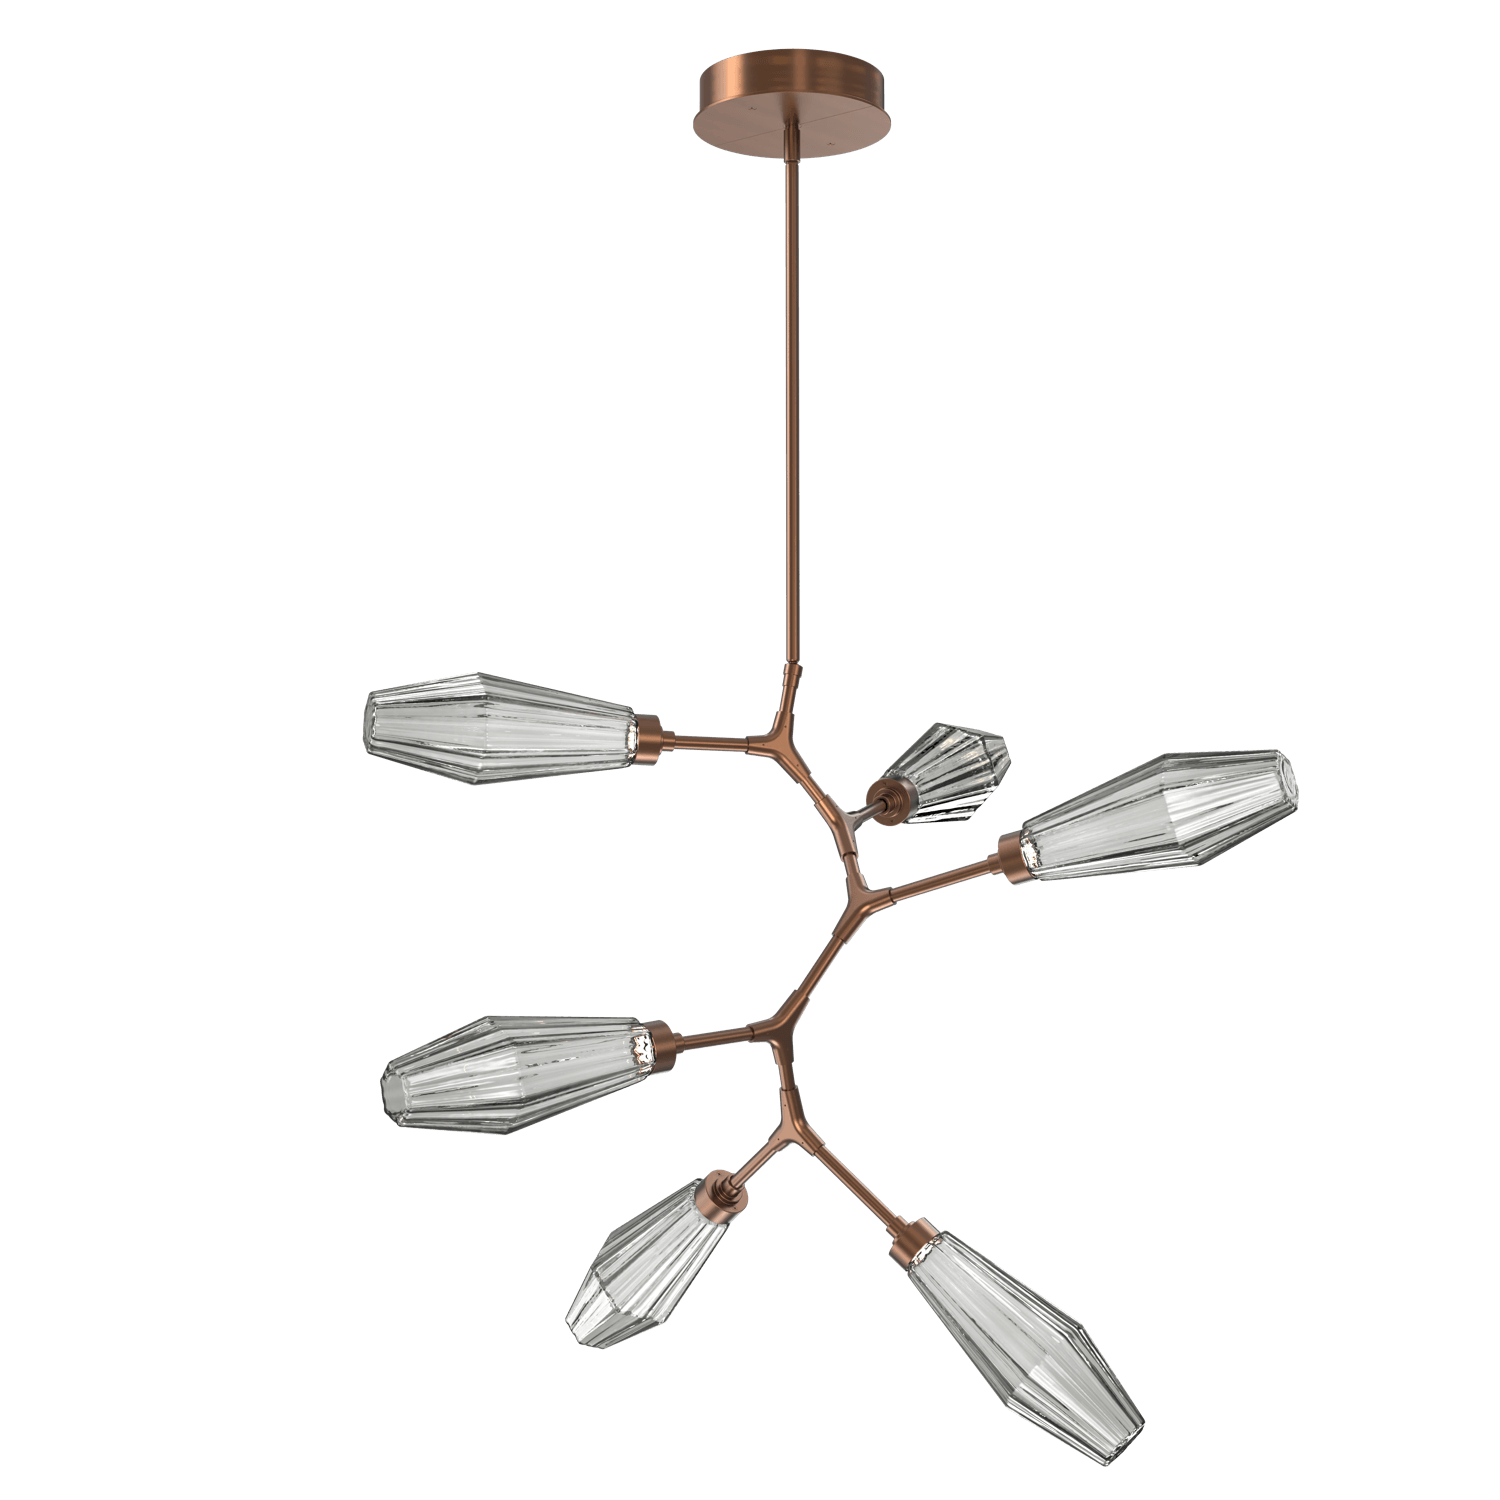 CHB0049-VA-RB-RS-Hammerton-Studio-Aalto-6-light-modern-vine-chandelier-with-oil-rubbed-bronze-finish-and-optic-ribbed-smoke-glass-shades-and-LED-lamping